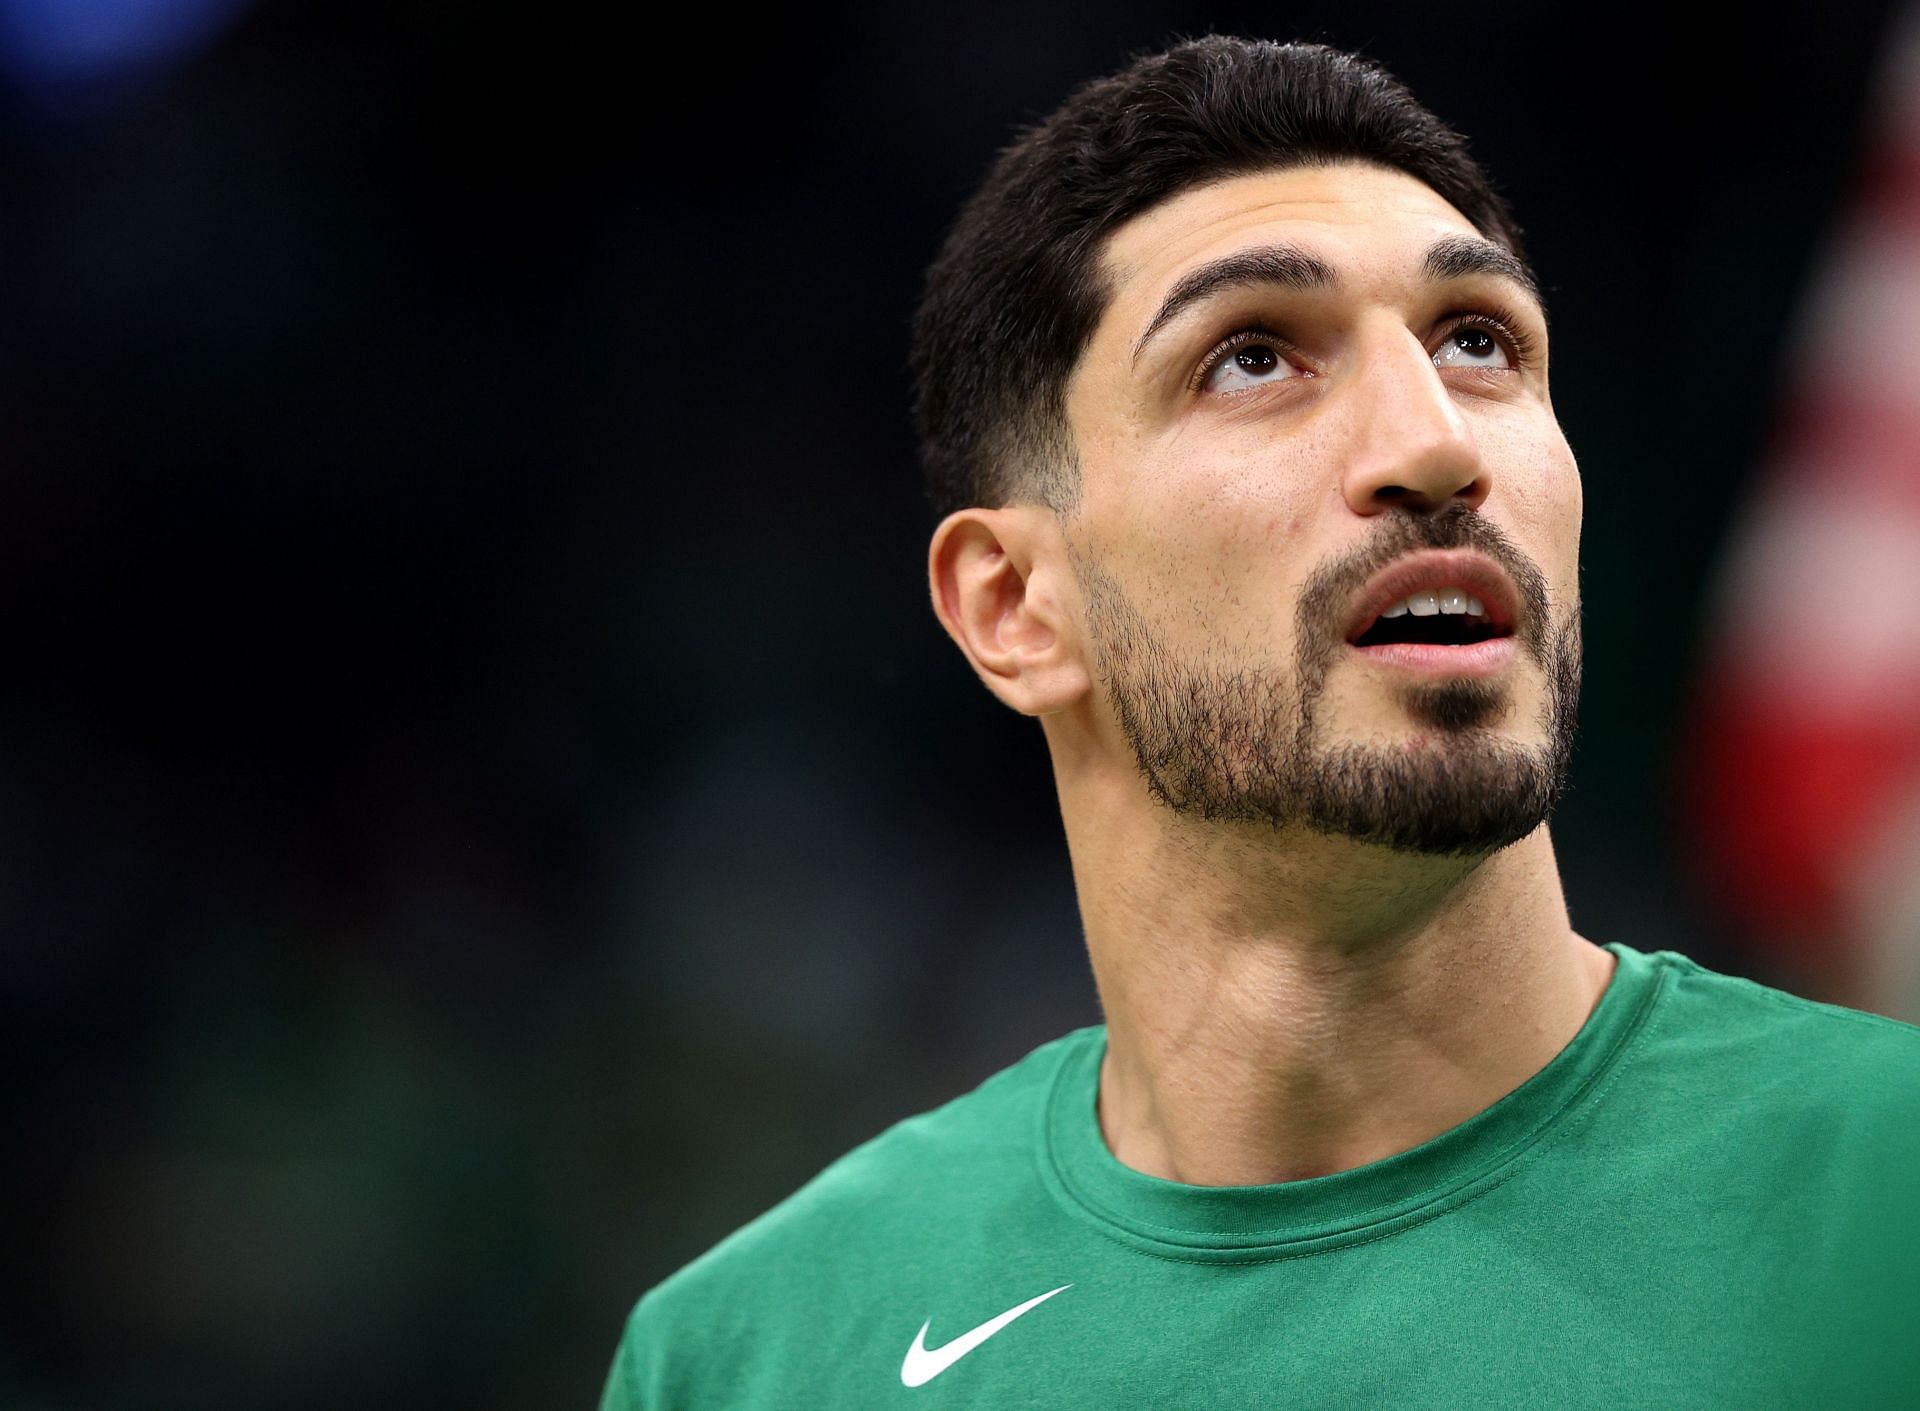 Enes Kanter Freedom in a game against the Toronto Raptors